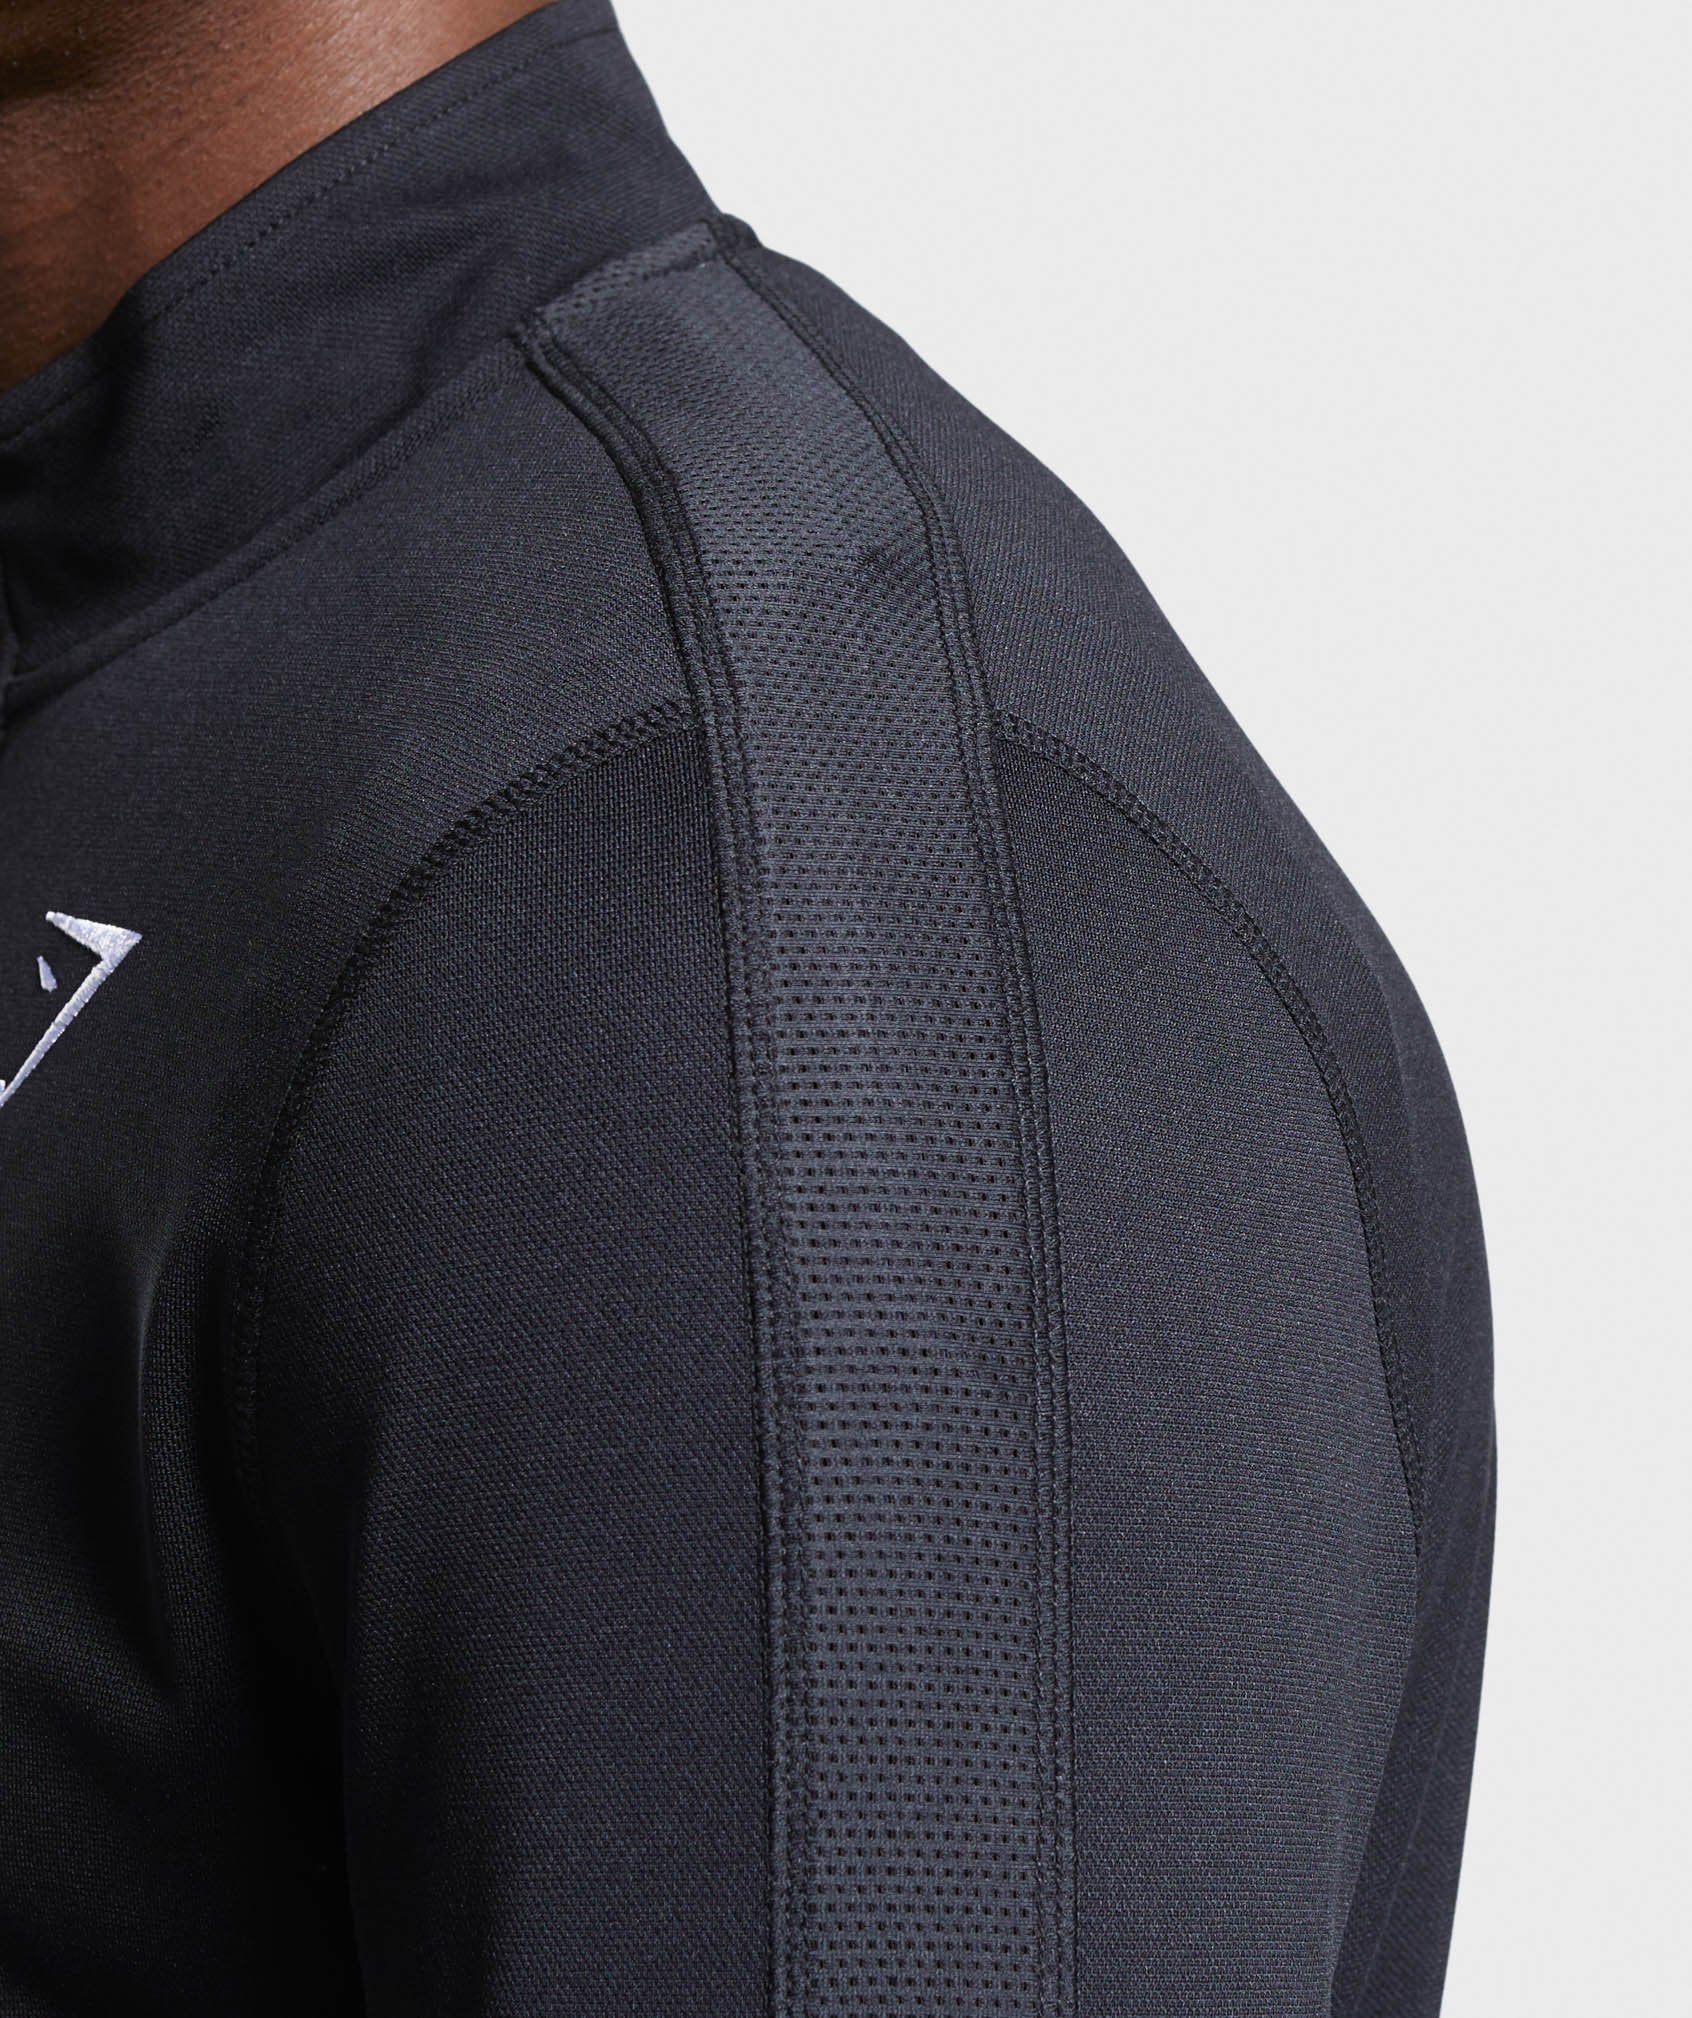 React Training Track Top in Black - view 6